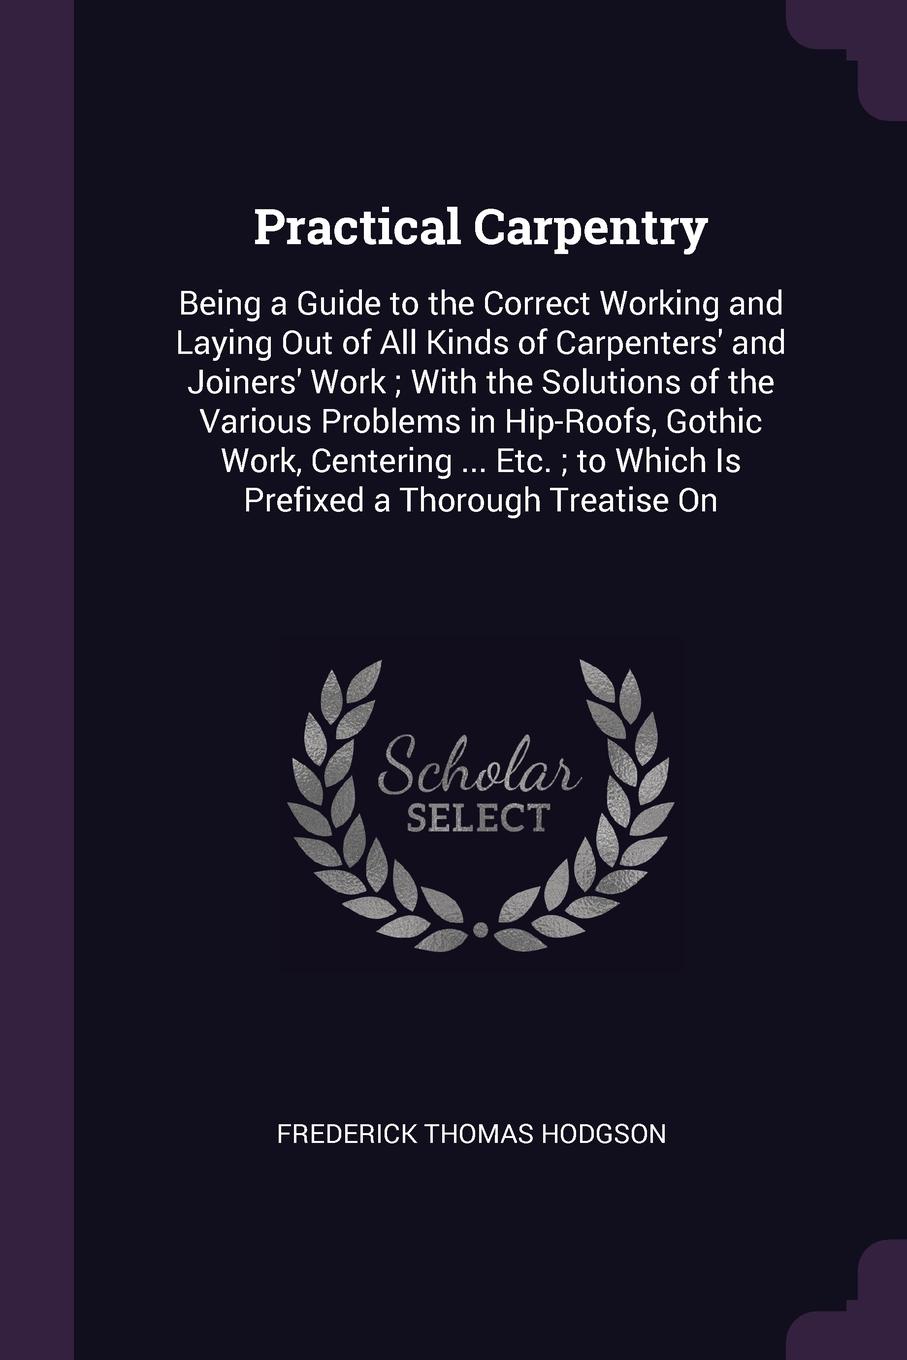 Practical Carpentry. Being a Guide to the Correct Working and Laying Out of All Kinds of Carpenters` and Joiners` Work ; With the Solutions of the Various Problems in Hip-Roofs, Gothic Work, Centering ... Etc. ; to Which Is Prefixed a Thorough Tre...